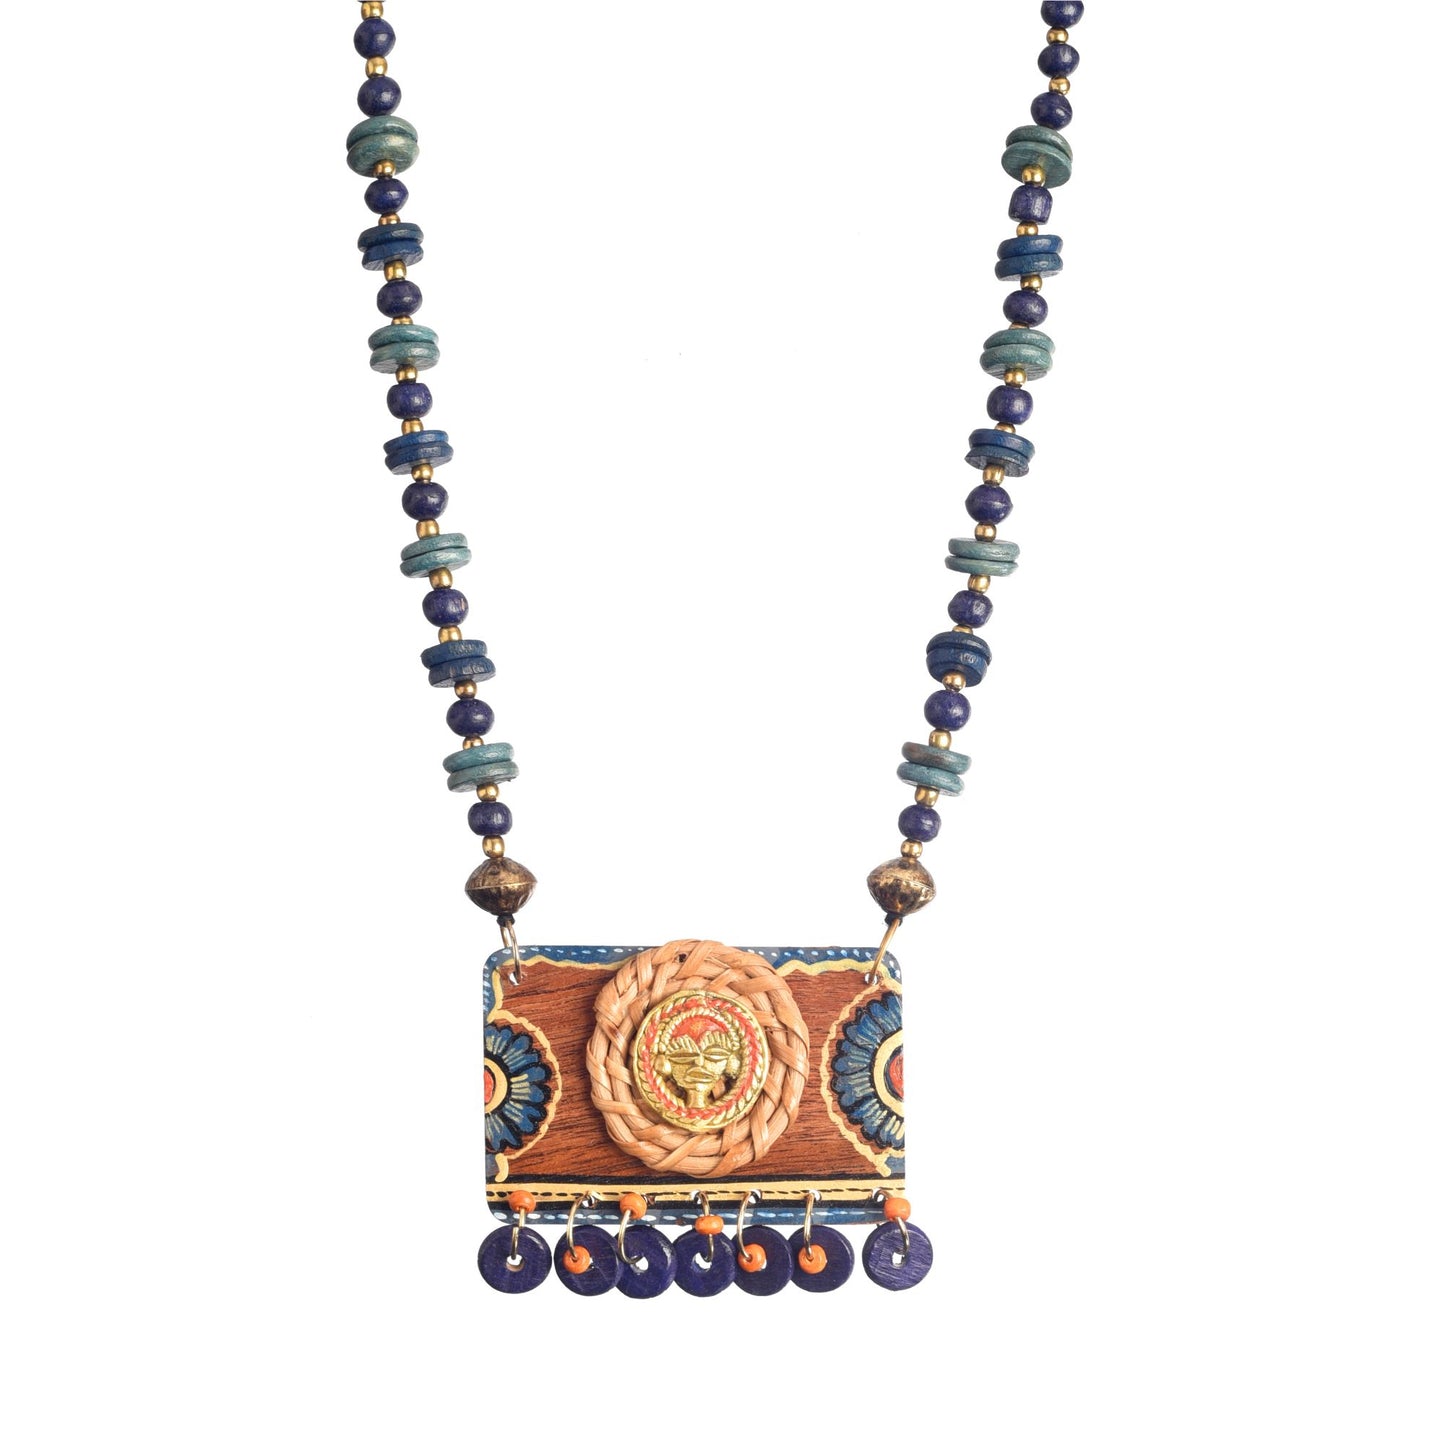 The Queen's Circle Handcrafted Tribal Necklace